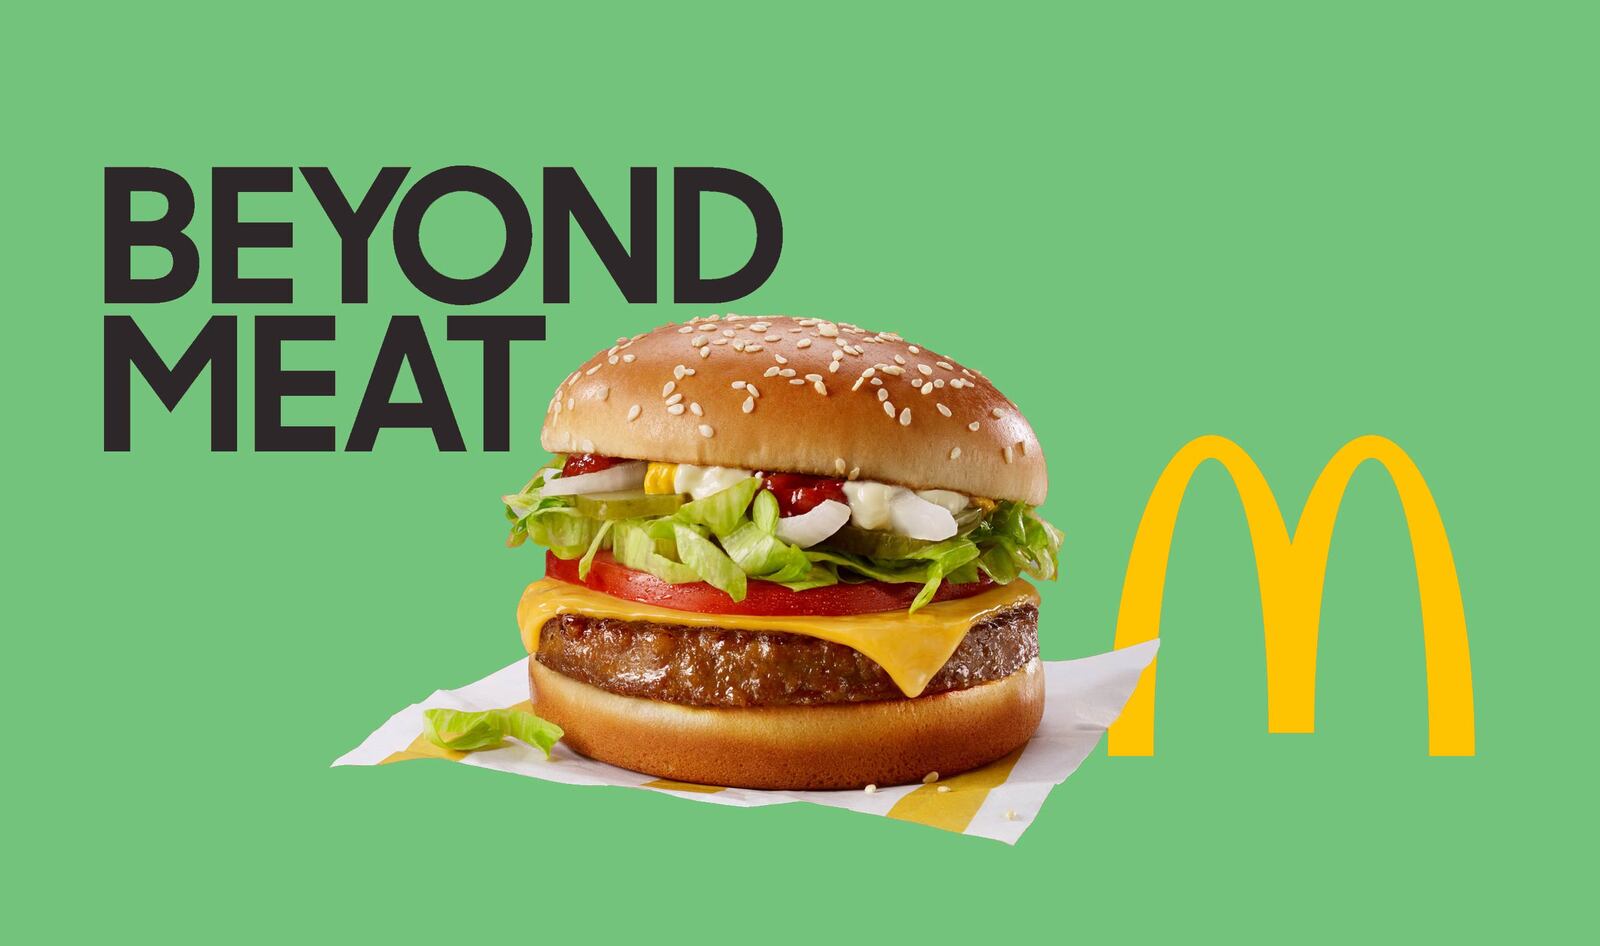 Beyond Meat Reveals It Is Behind the McDonald’s McPlant Burger